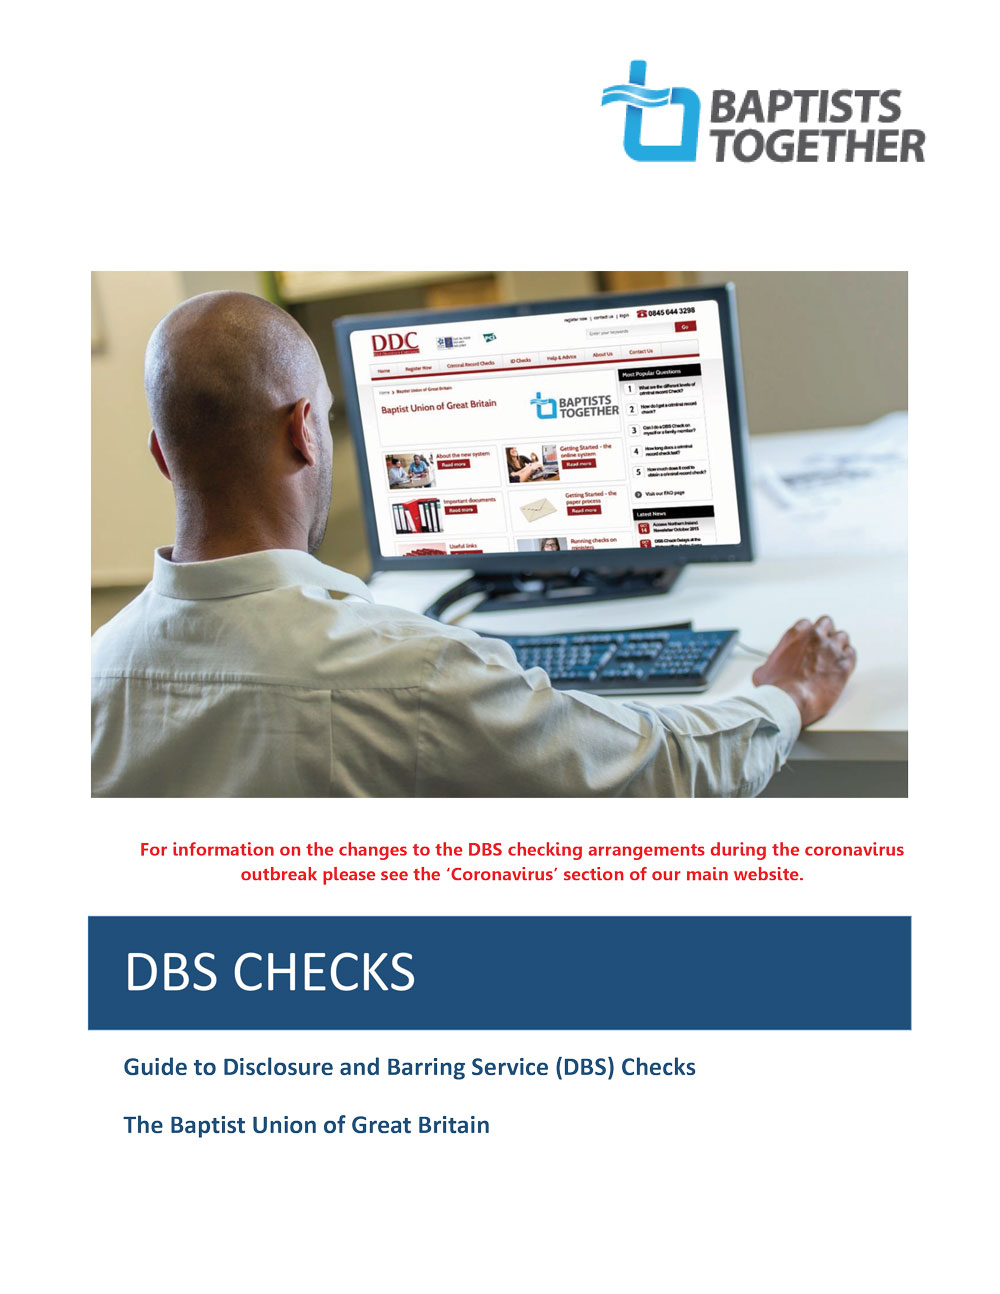 BUGB DBS Check Guide 30March20